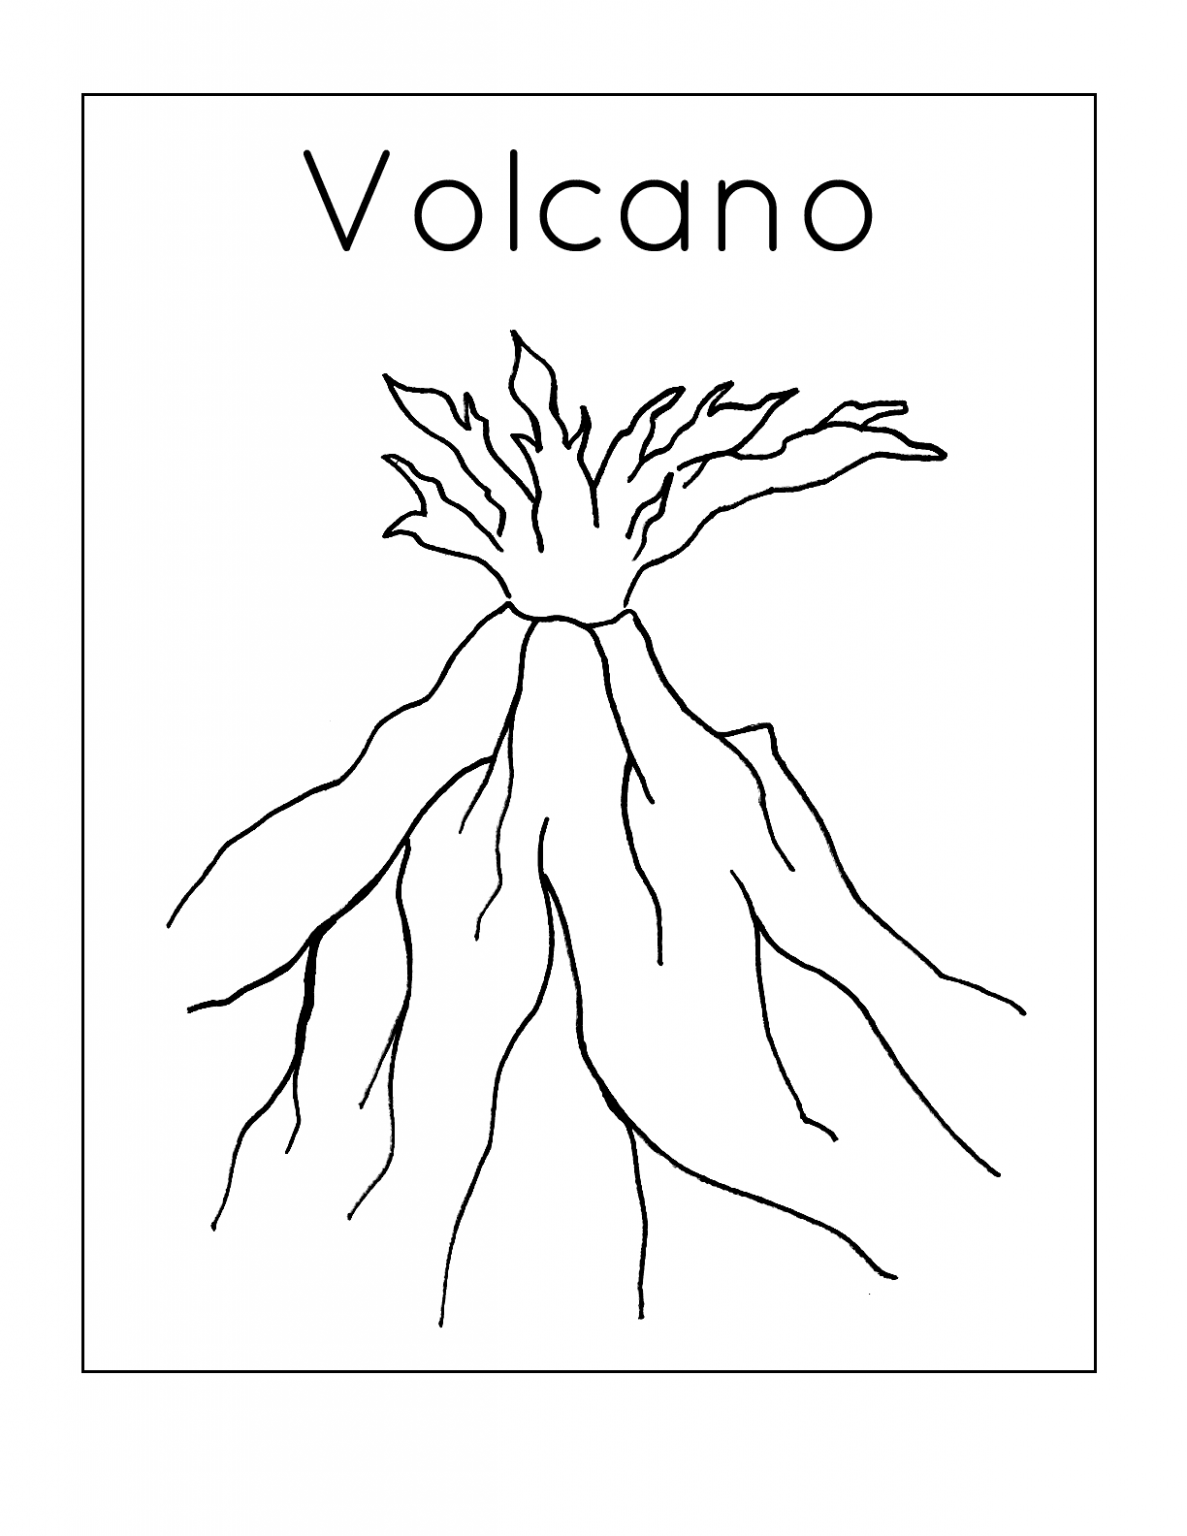 trees mountain volcano coloring pages